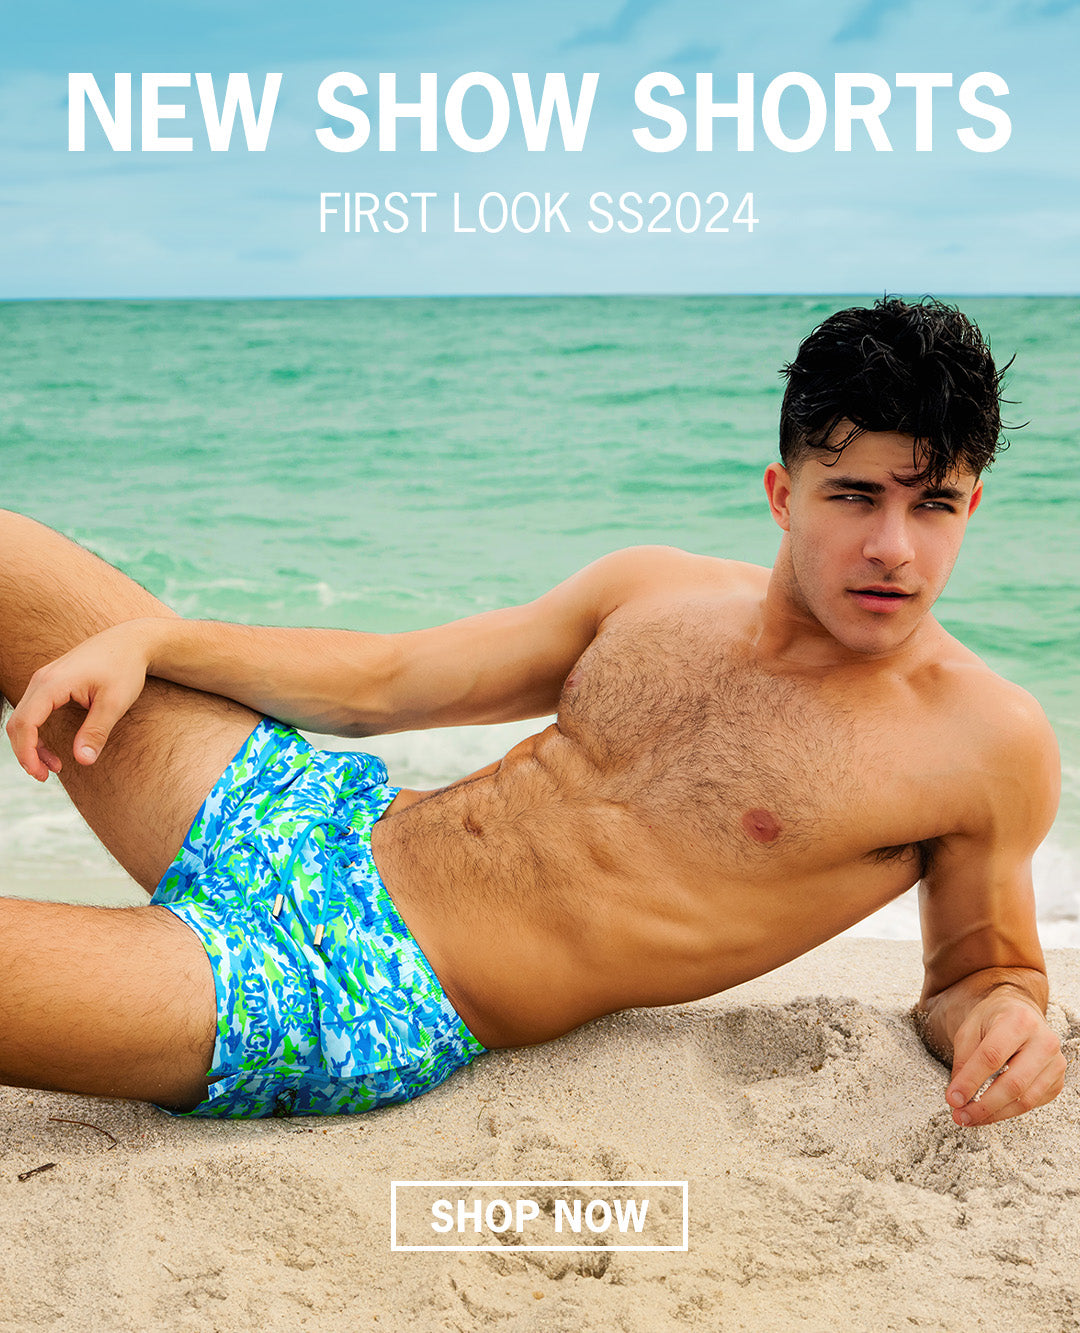 Featuring the new CAMPO POP Series in bright blues and greens. Part of the new prints of Show Shorts and men's beach shorts for Spring-Summer  SS2024 by Bang clothing Miami.